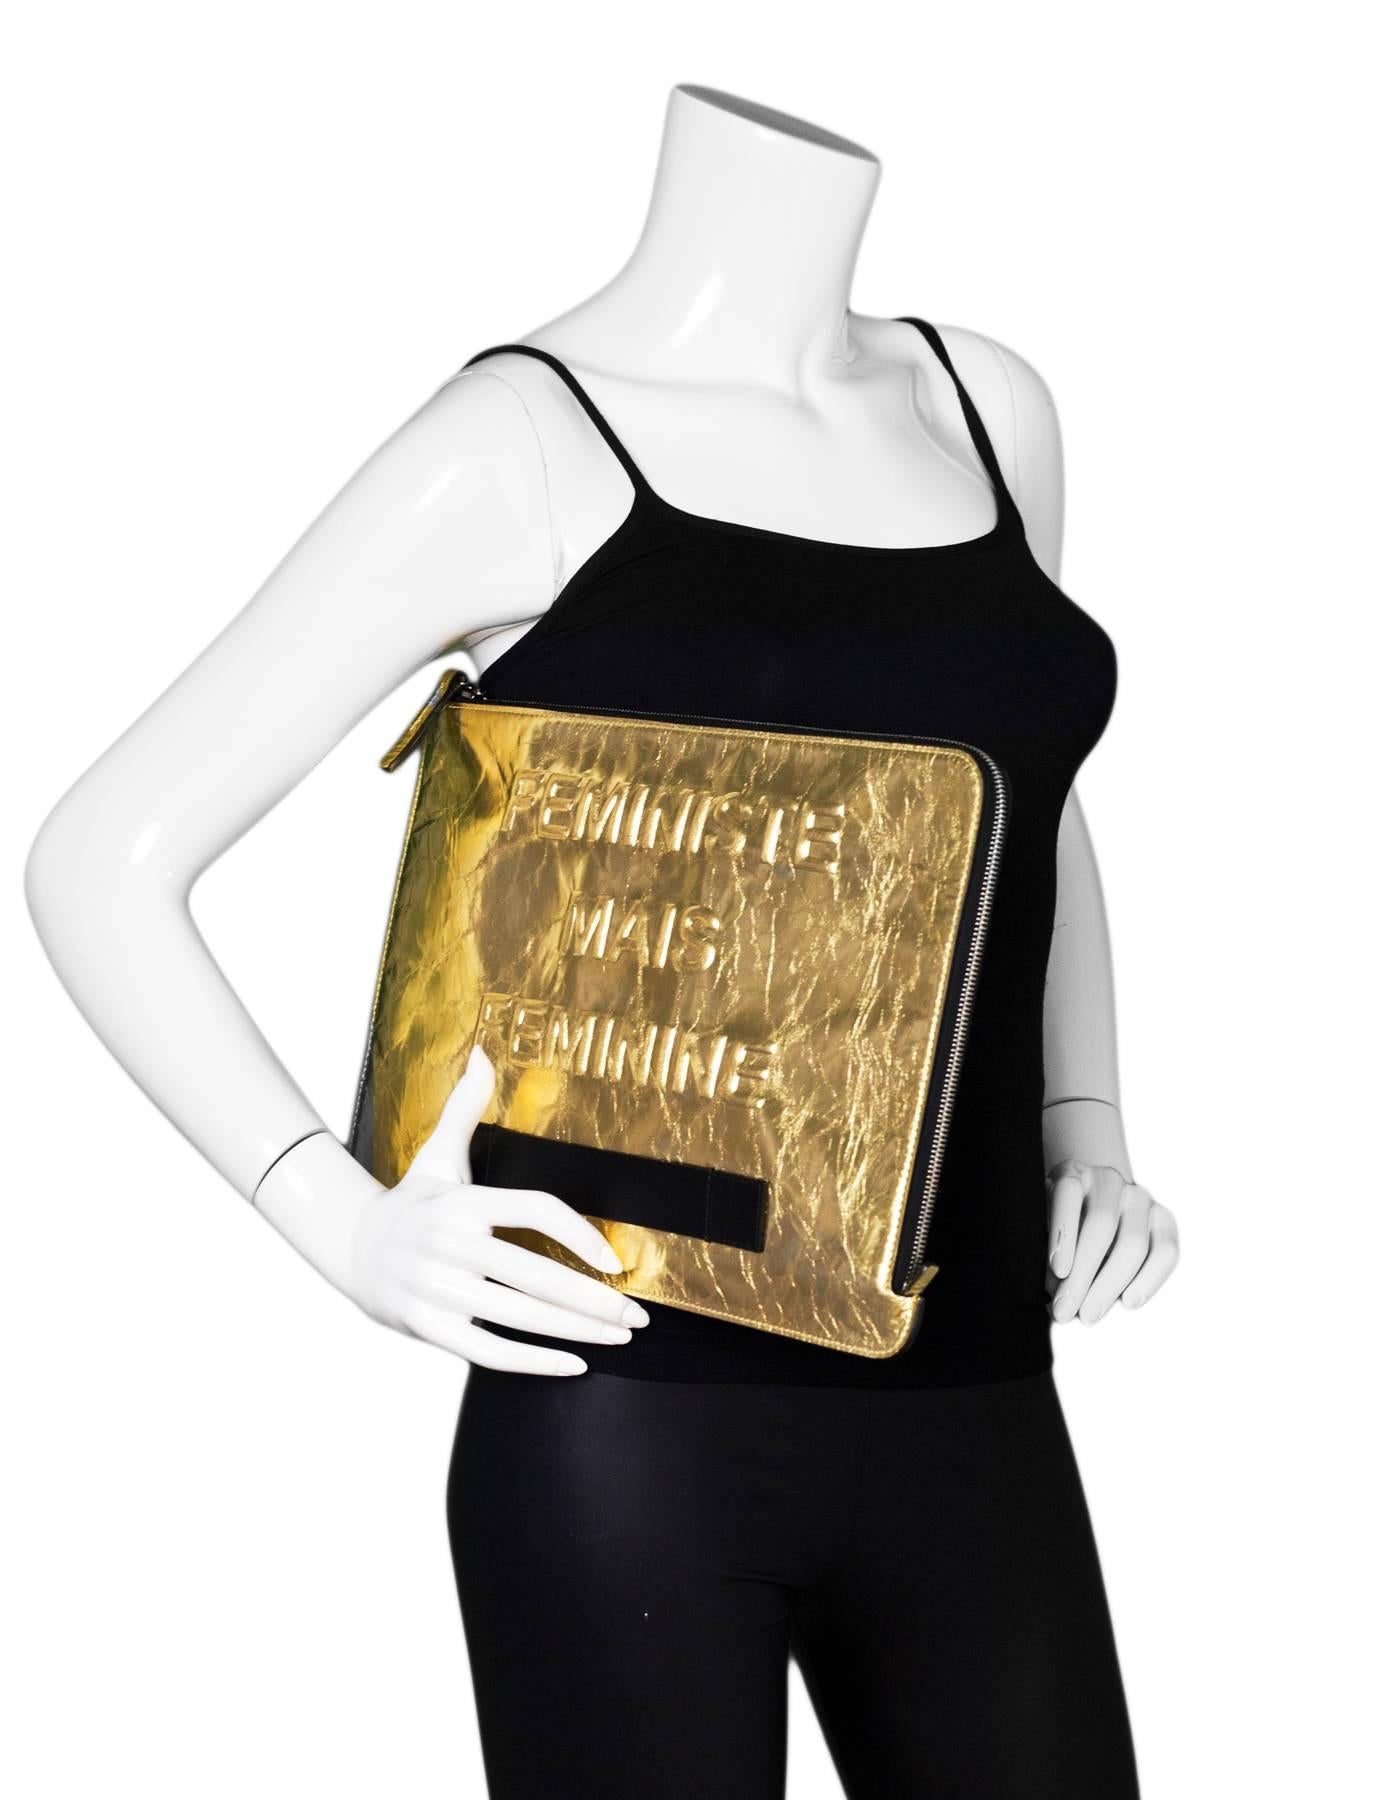 Chanel Gold Crinkled Leather Large Feminist Mais Feminine Clutch 

Made In: Italy
Year of Production: 2015
Color: Gold
Hardware: Ruthenium
Materials: Leather, metal
Lining: Black textile
Closure/Opening: Zip around
Exterior Pockets: One at